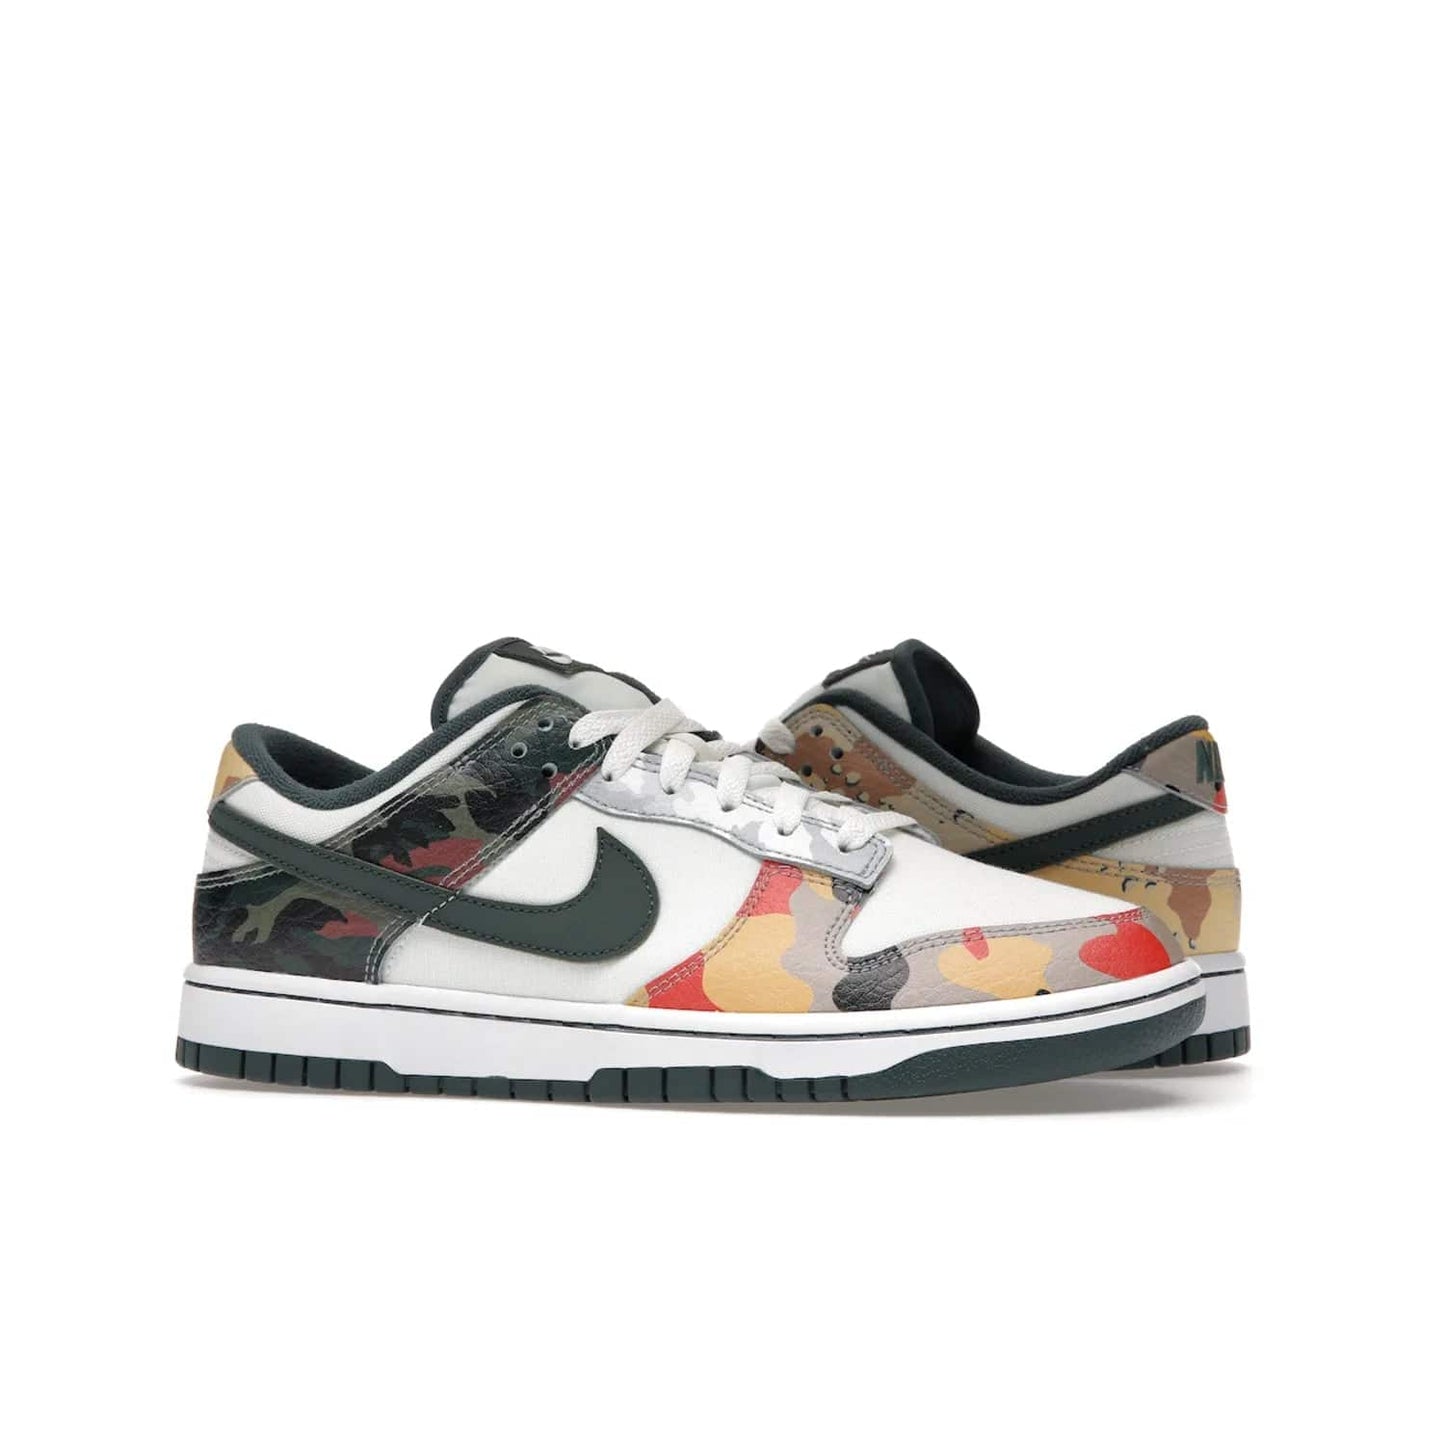 Nike Dunk Low SE Sail Multi-Camo - Image 3 - Only at www.BallersClubKickz.com - Classic design meets statement style in the Nike Dunk Low SE Sail Multi-Camo. White leather base with multi-color camo overlays, vibrant Nike Swooshes, and orange Nike embroidery. Get yours August 2021.